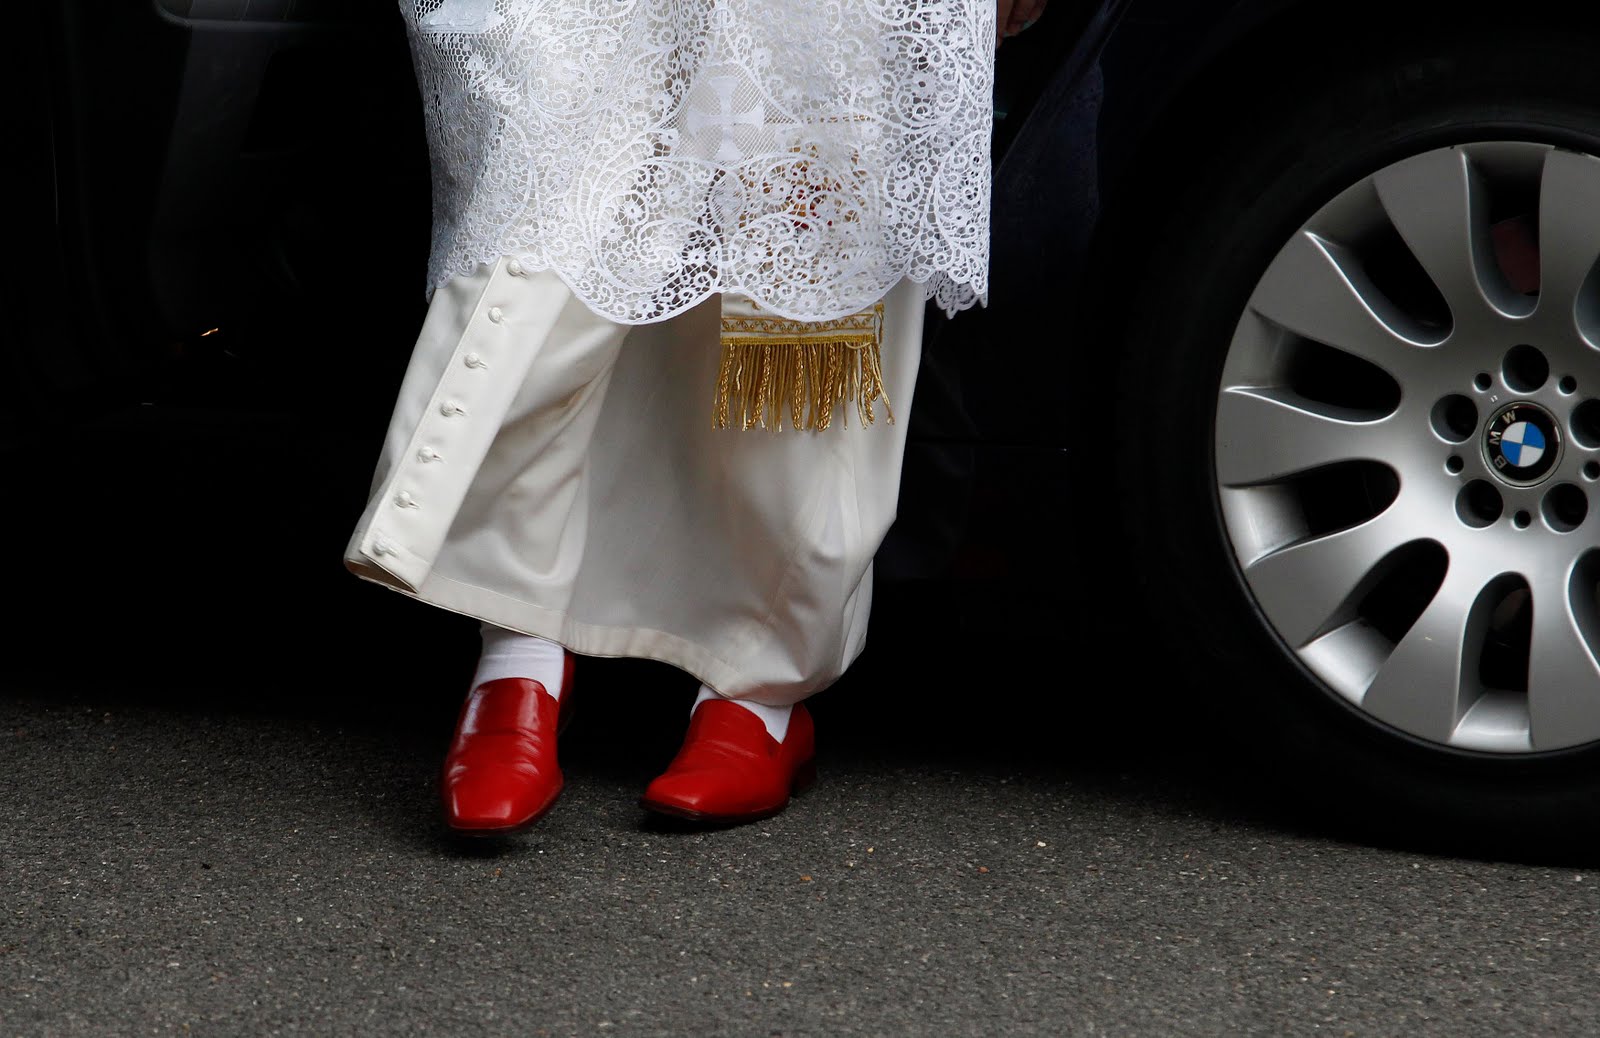 The Truth Behind the Pope's Ruby Red Slippers